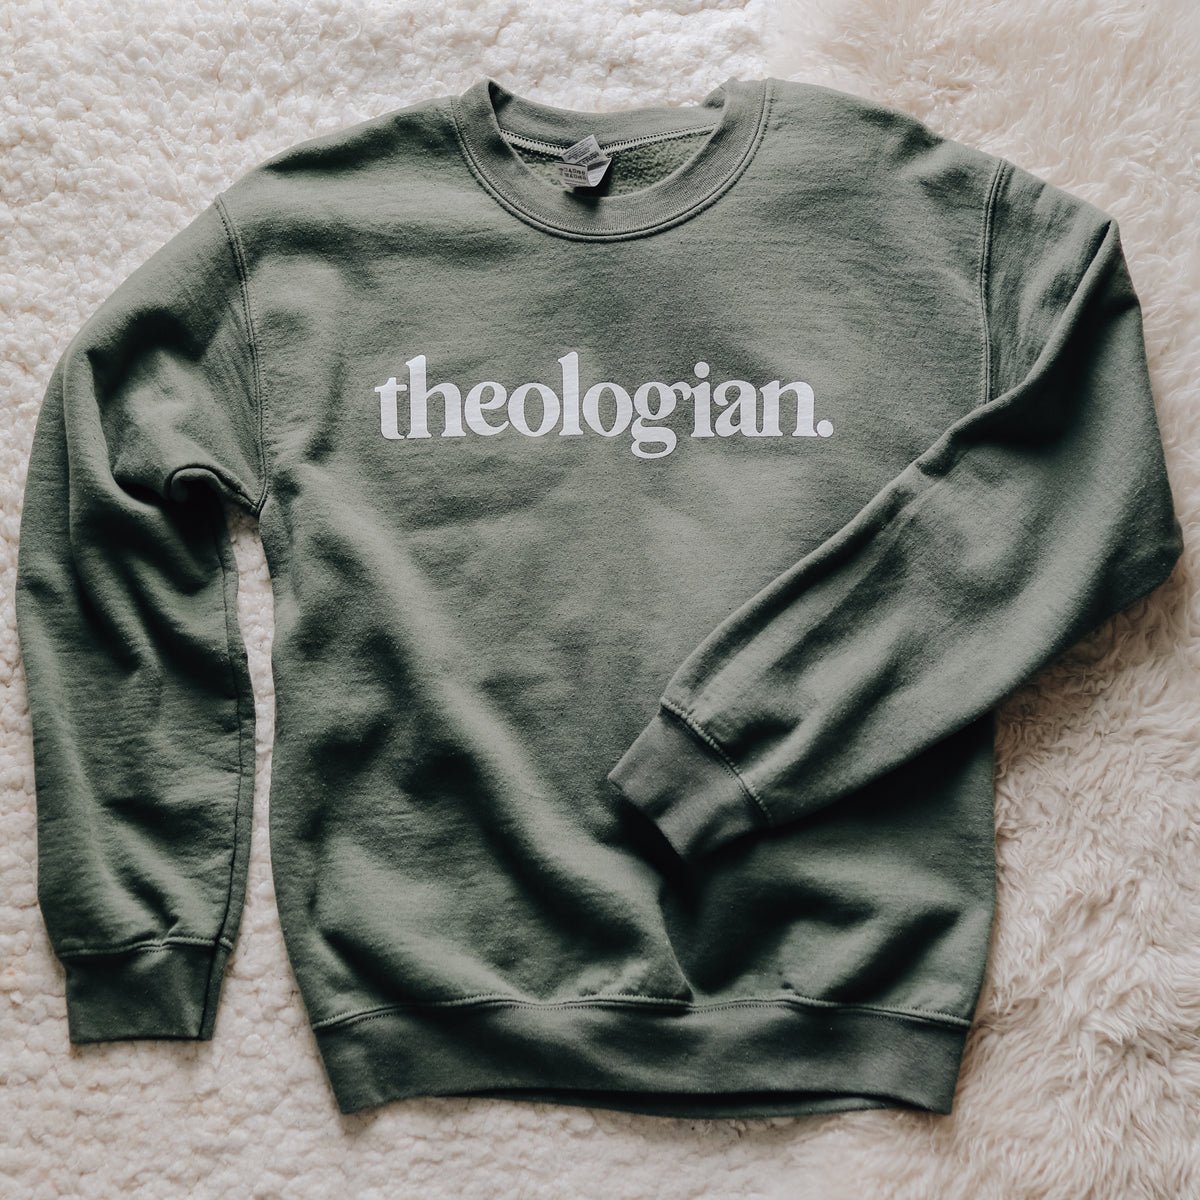 Theologian Sweatshirt - Olive – The Daily Grace Co.